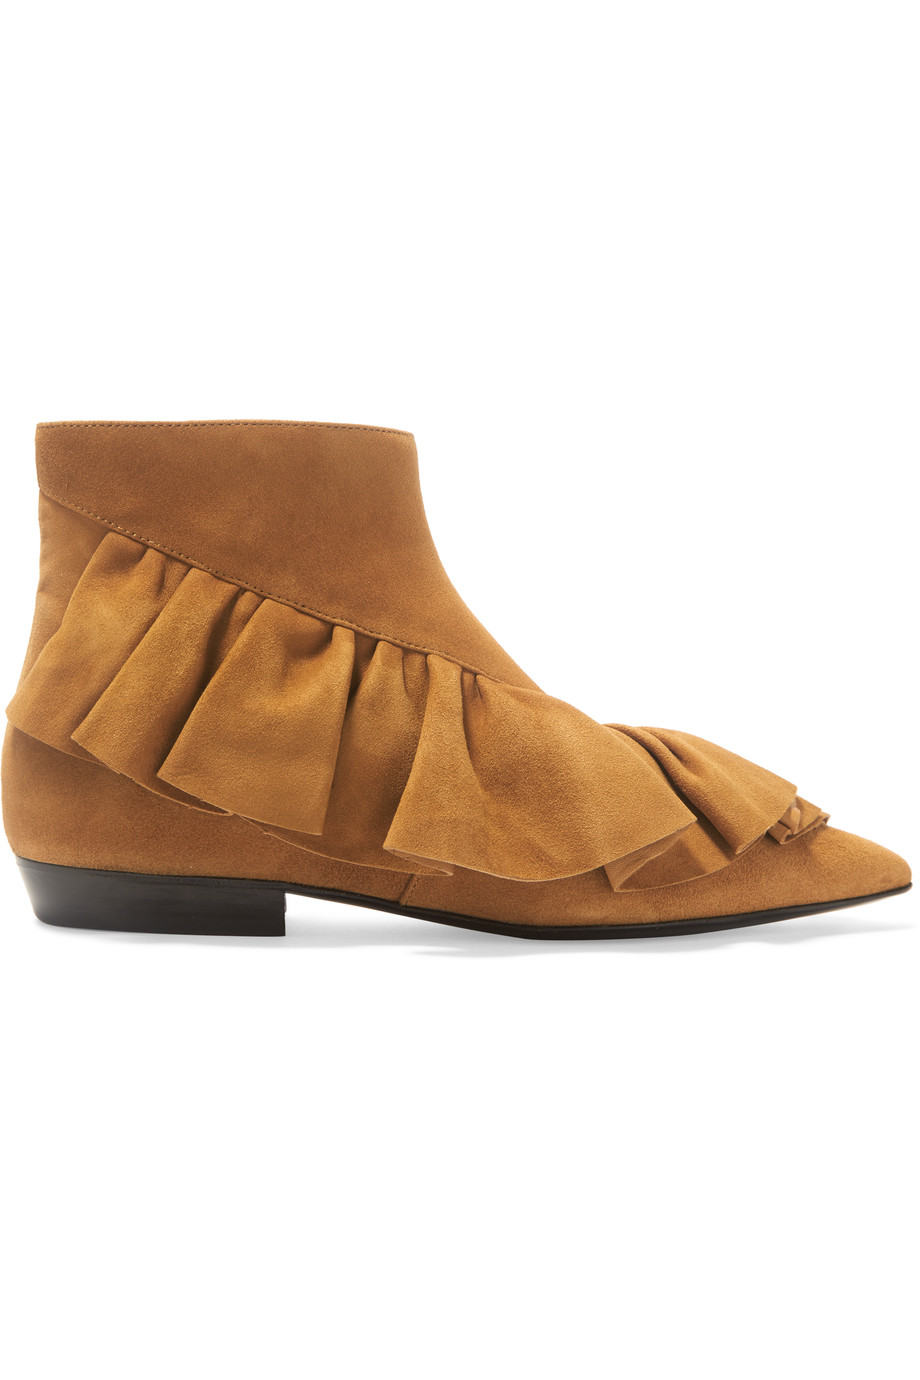 Jw Anderson Ruffled Suede Ankle Boots ModeSens